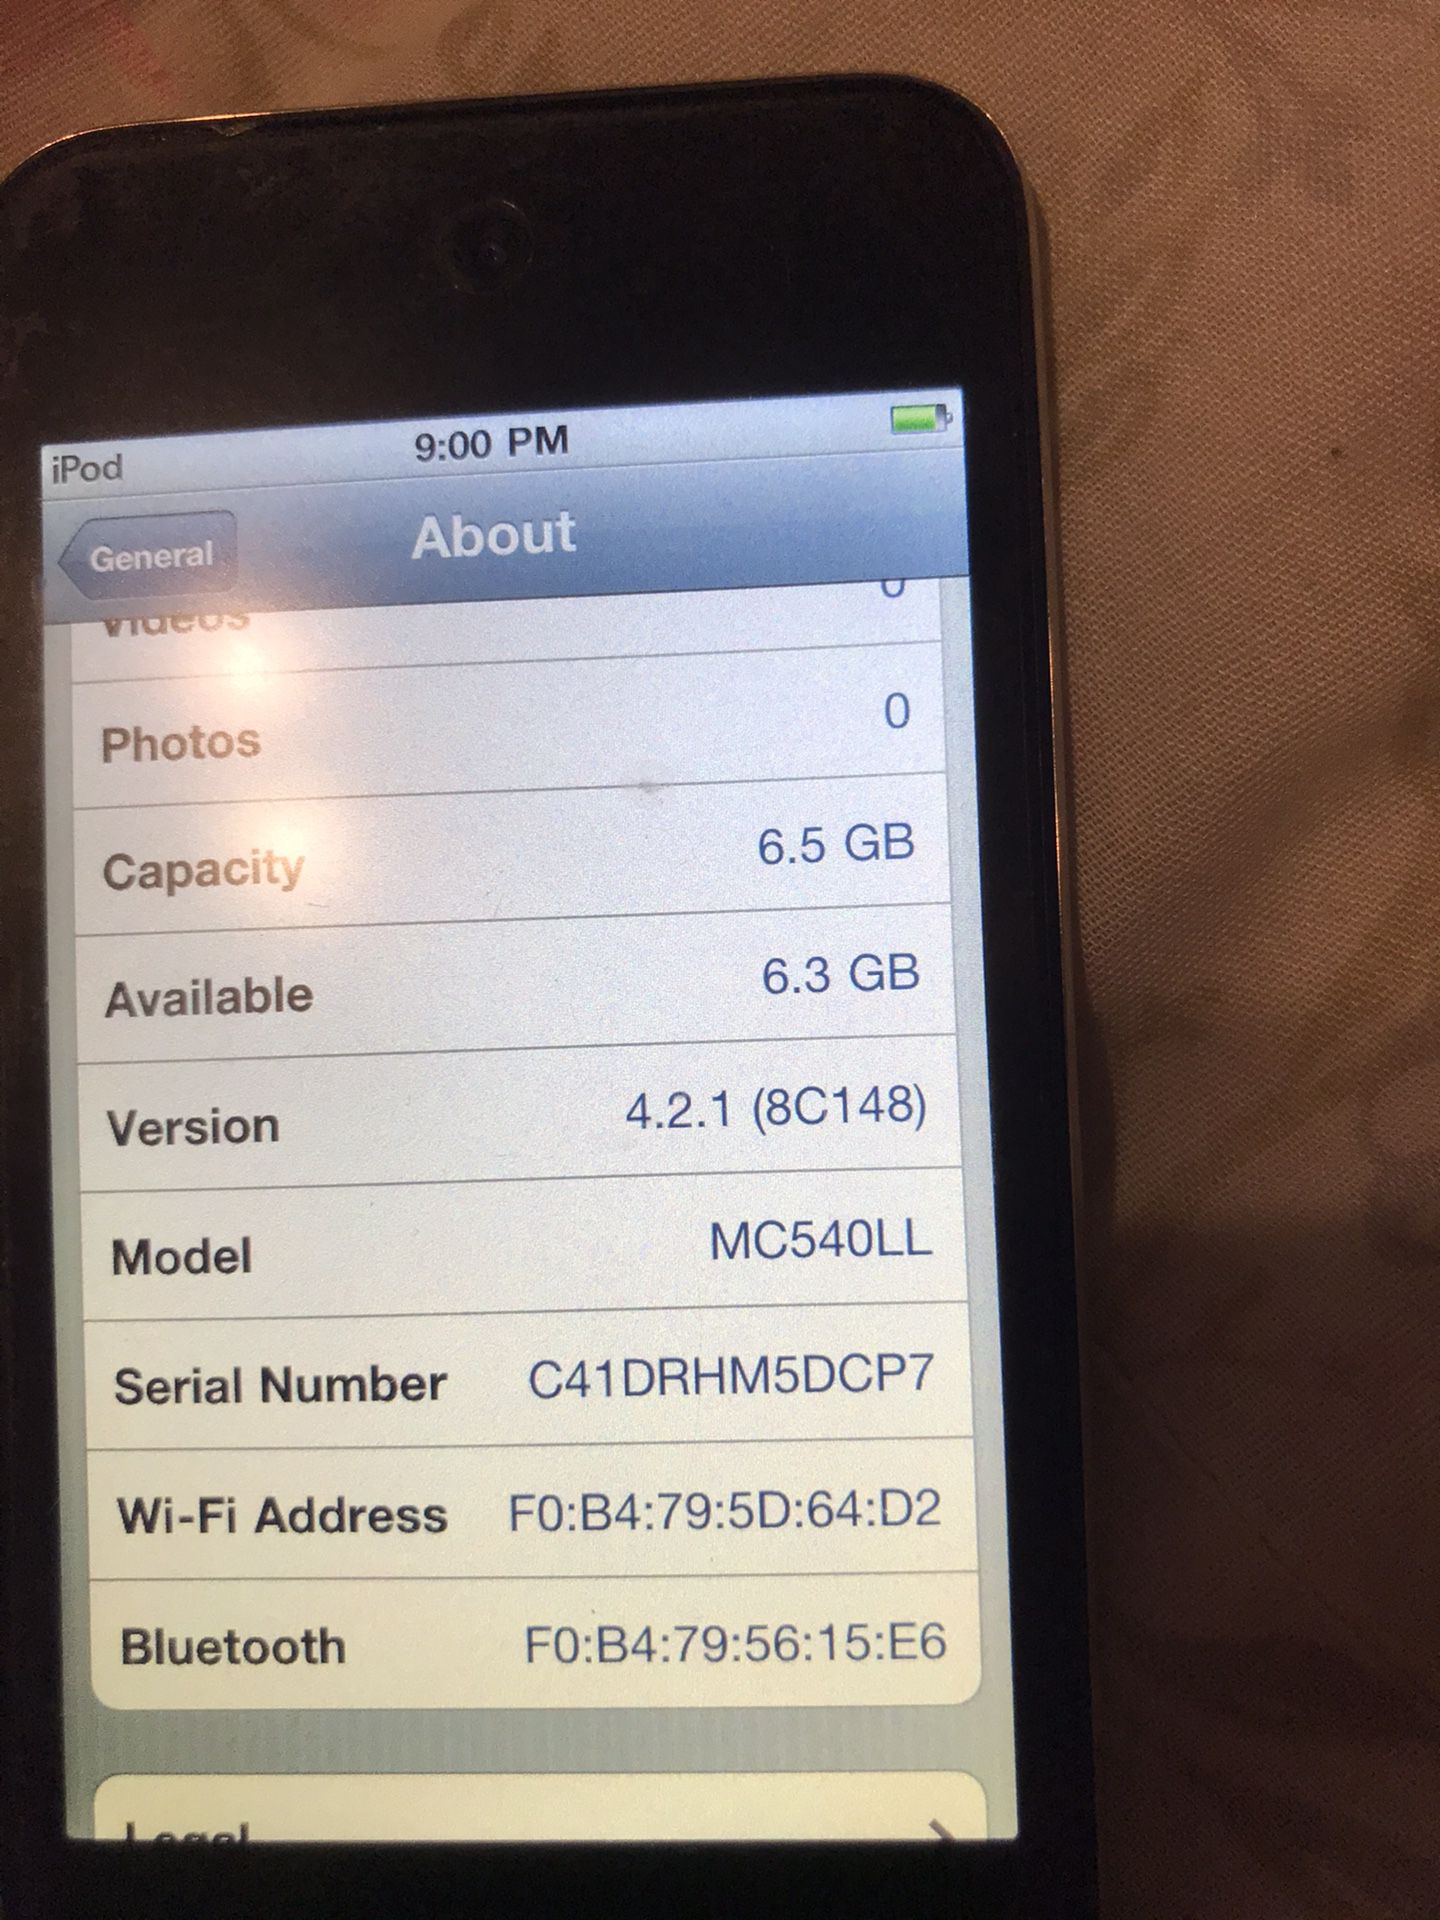 Read !!! Yes I still have it IPod touch 8gb 4th gen only pl look/zoom.in on pix4condition as is price is firm Serious only. yes I still have it not a